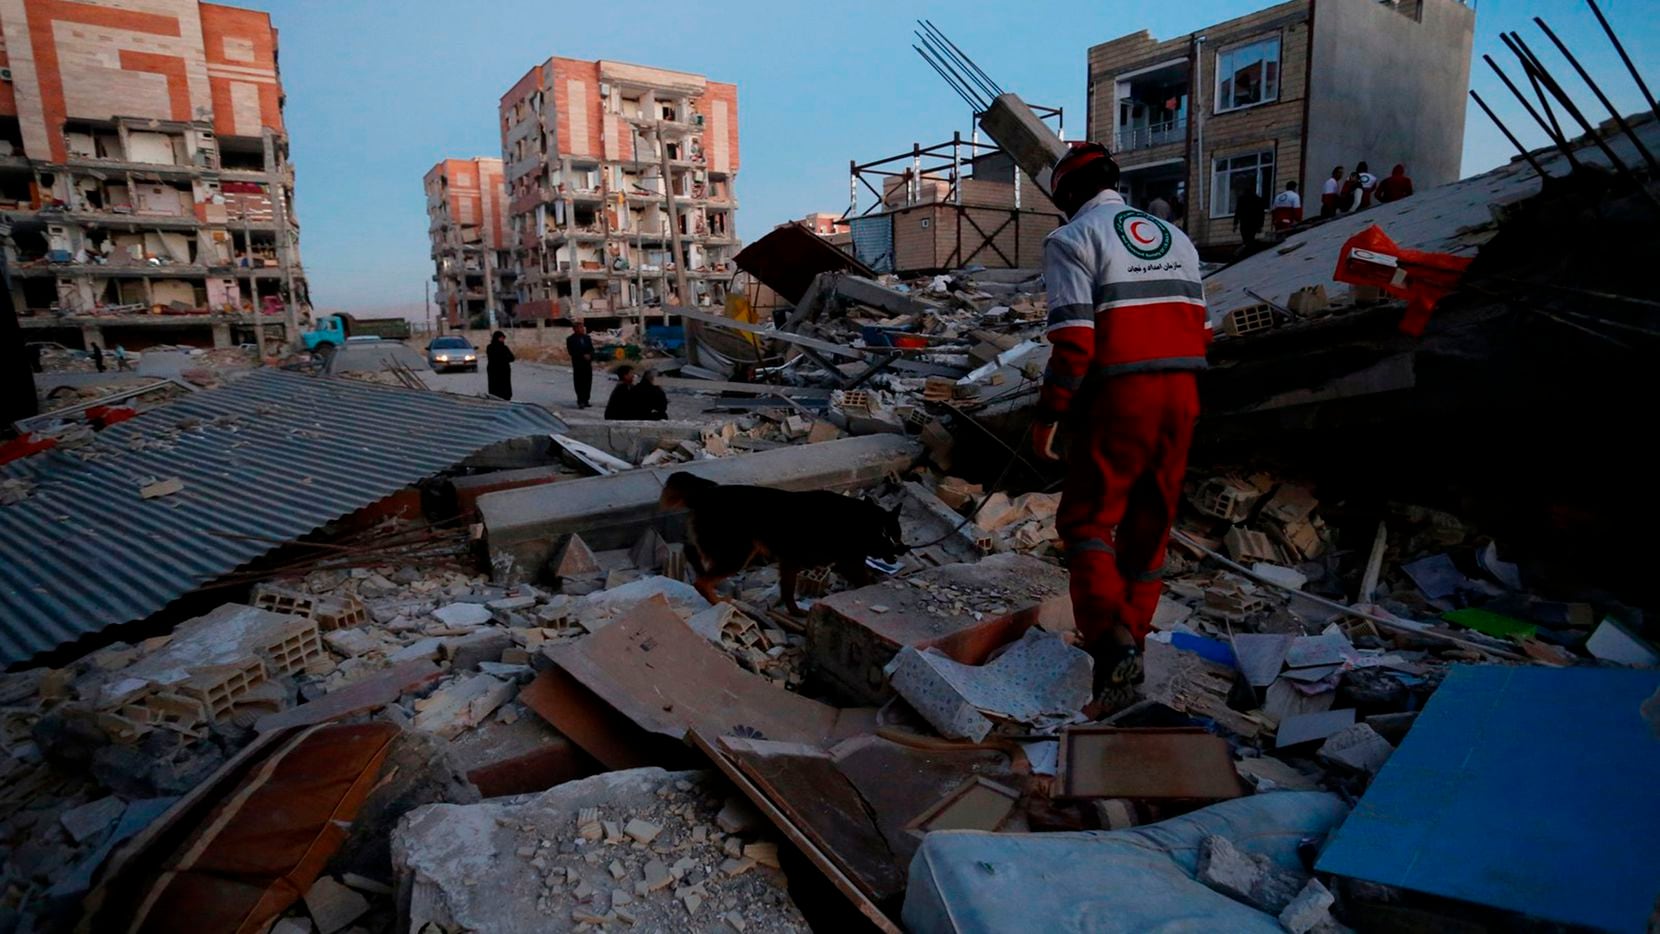 More than 200 dead, hundreds injured after earthquake at Iran-Iraq border